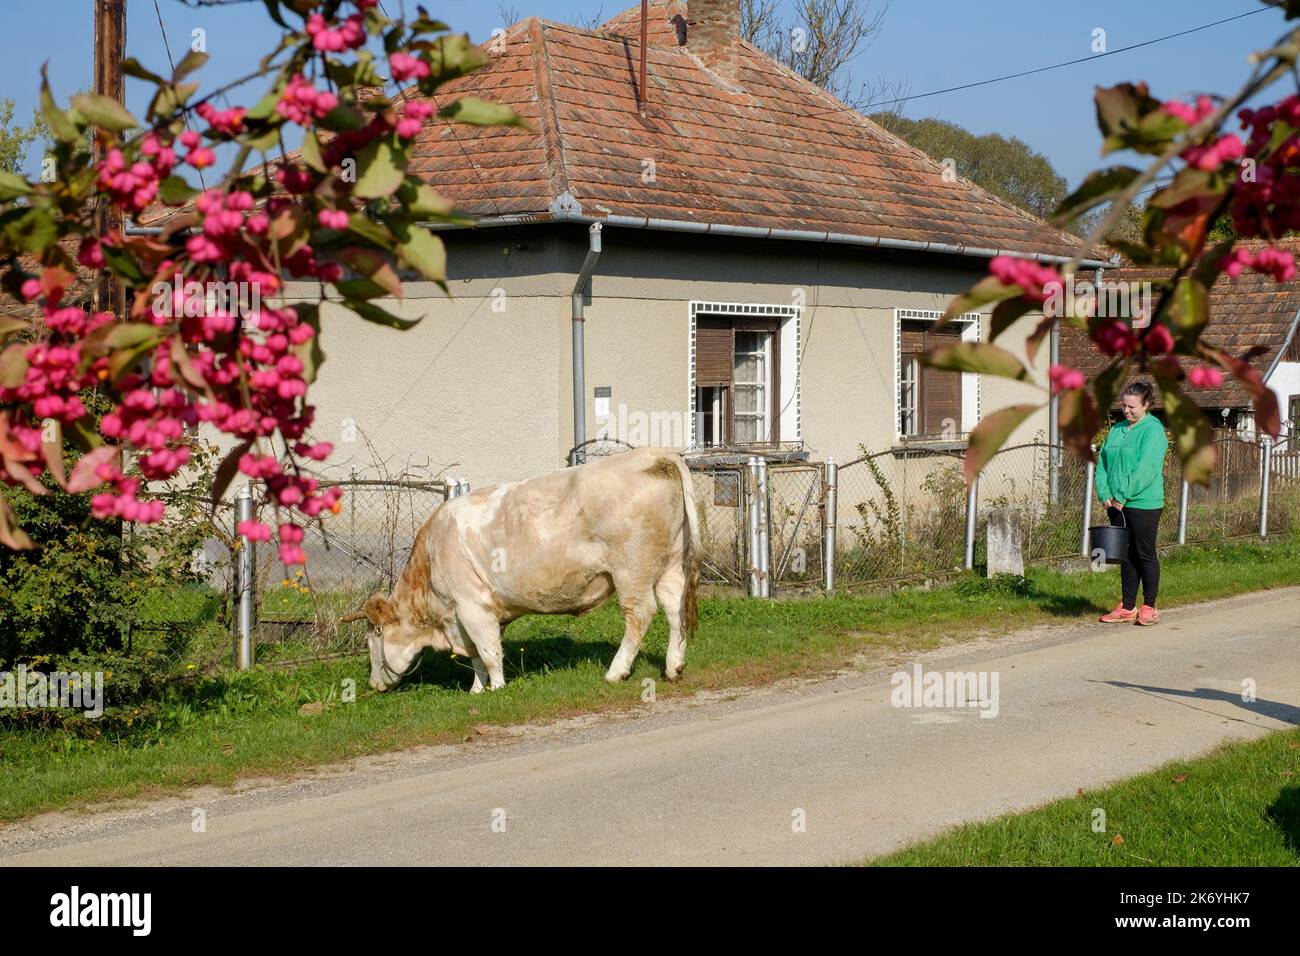 local woman walking her dairy cow to pasture through small rural hamlet lane zala county hungary Stock Photo